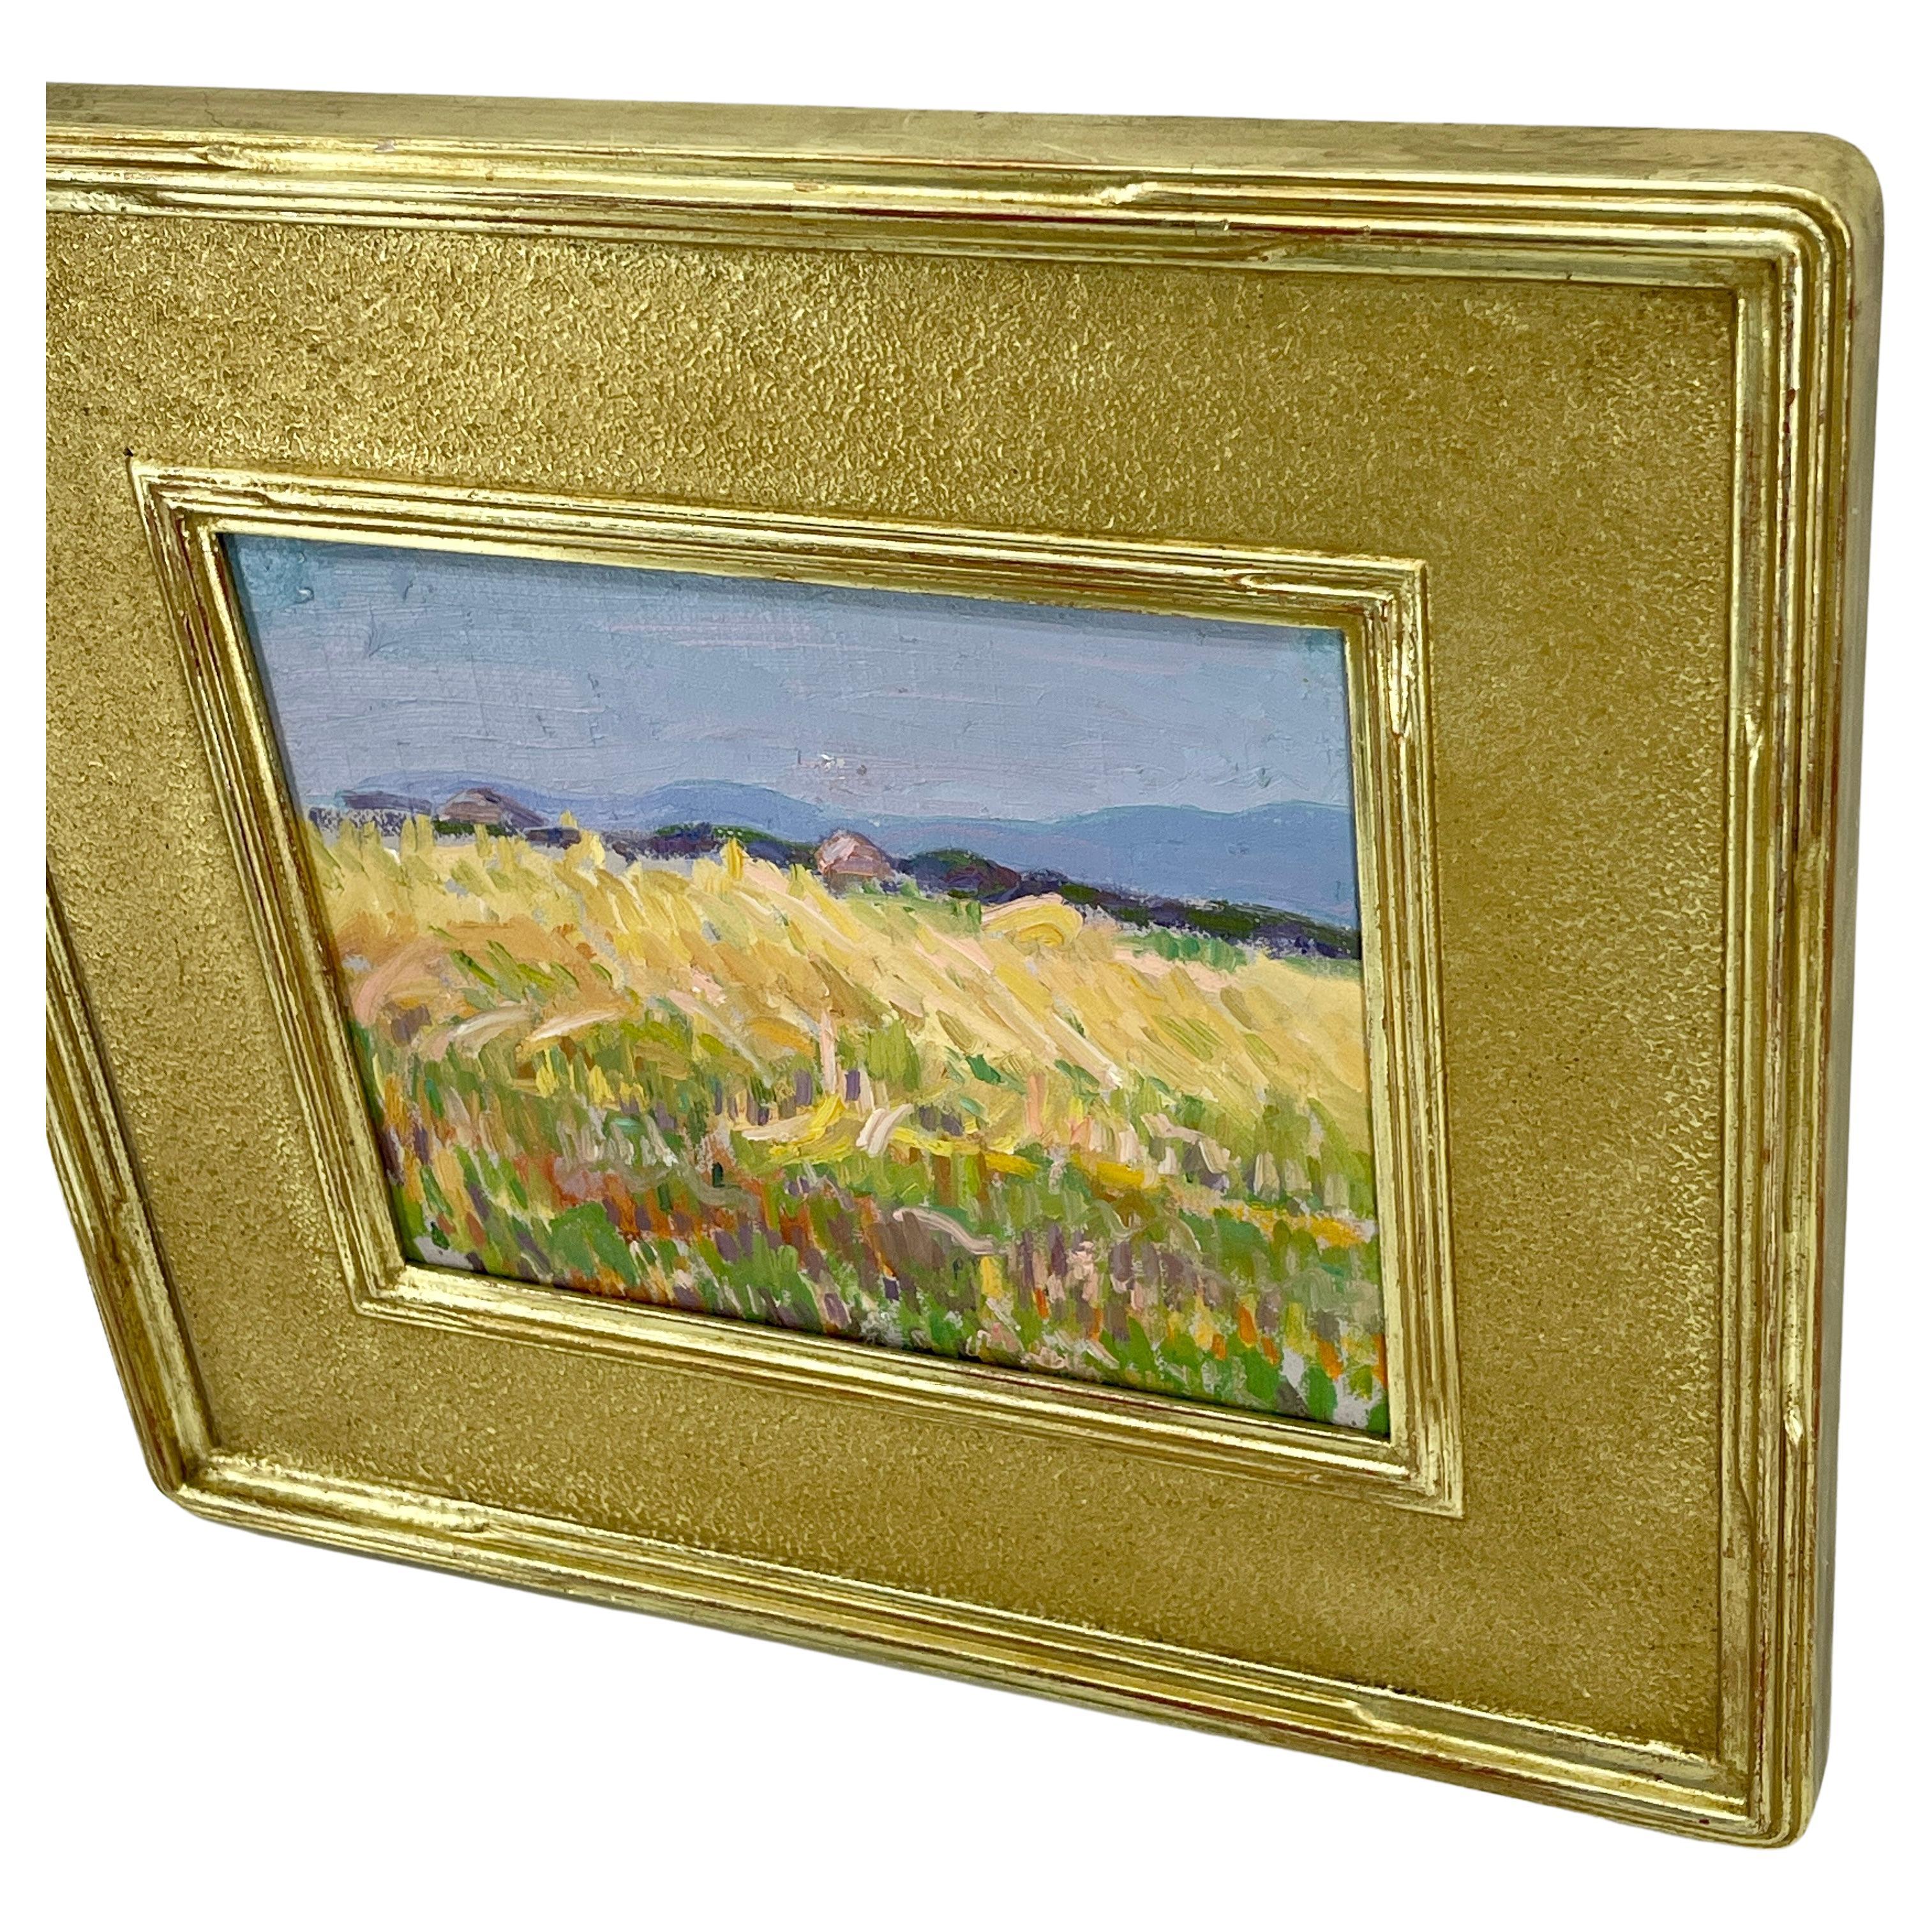 Hand-Crafted French Impressionist Landscape Oil Painting With Haystacks, circa 1930's For Sale